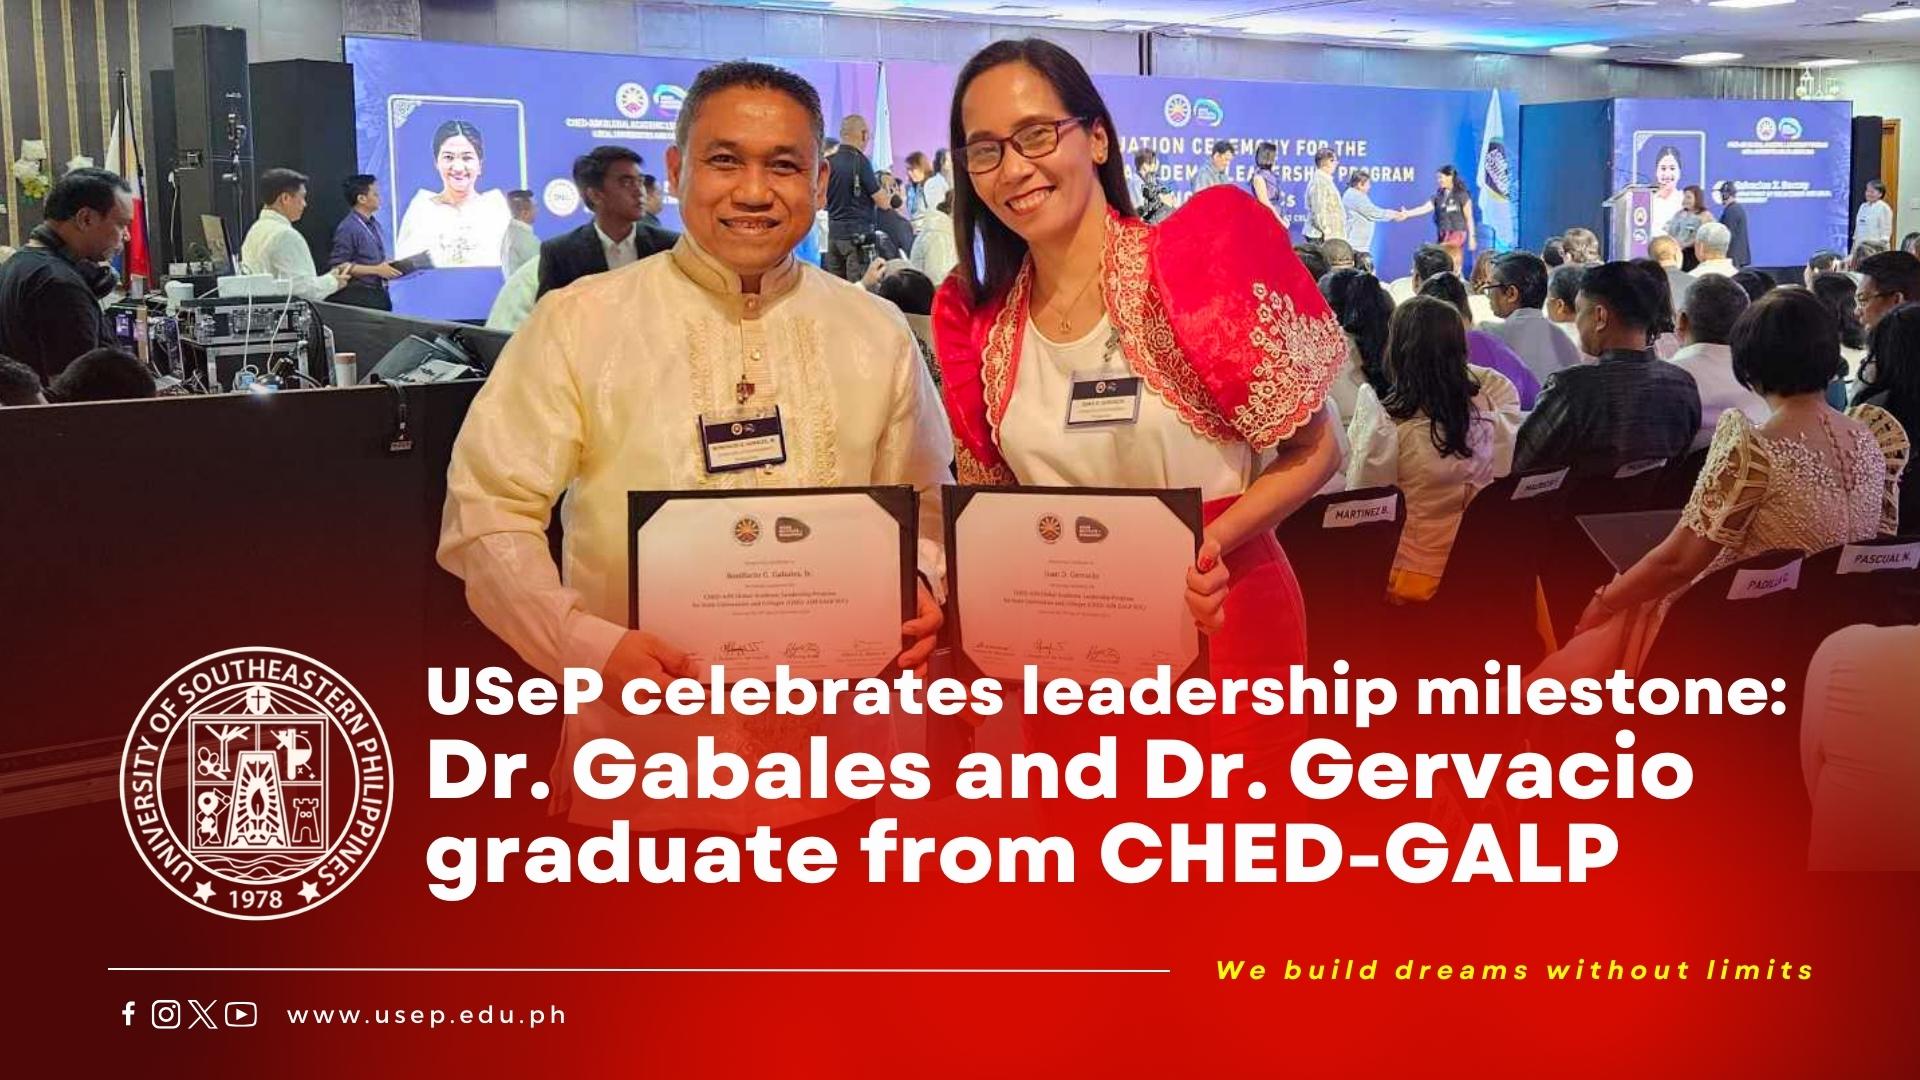 USeP celebrates leadership milestone: Dr. Gabales and Dr. Gervacio graduate from CHED-GALP